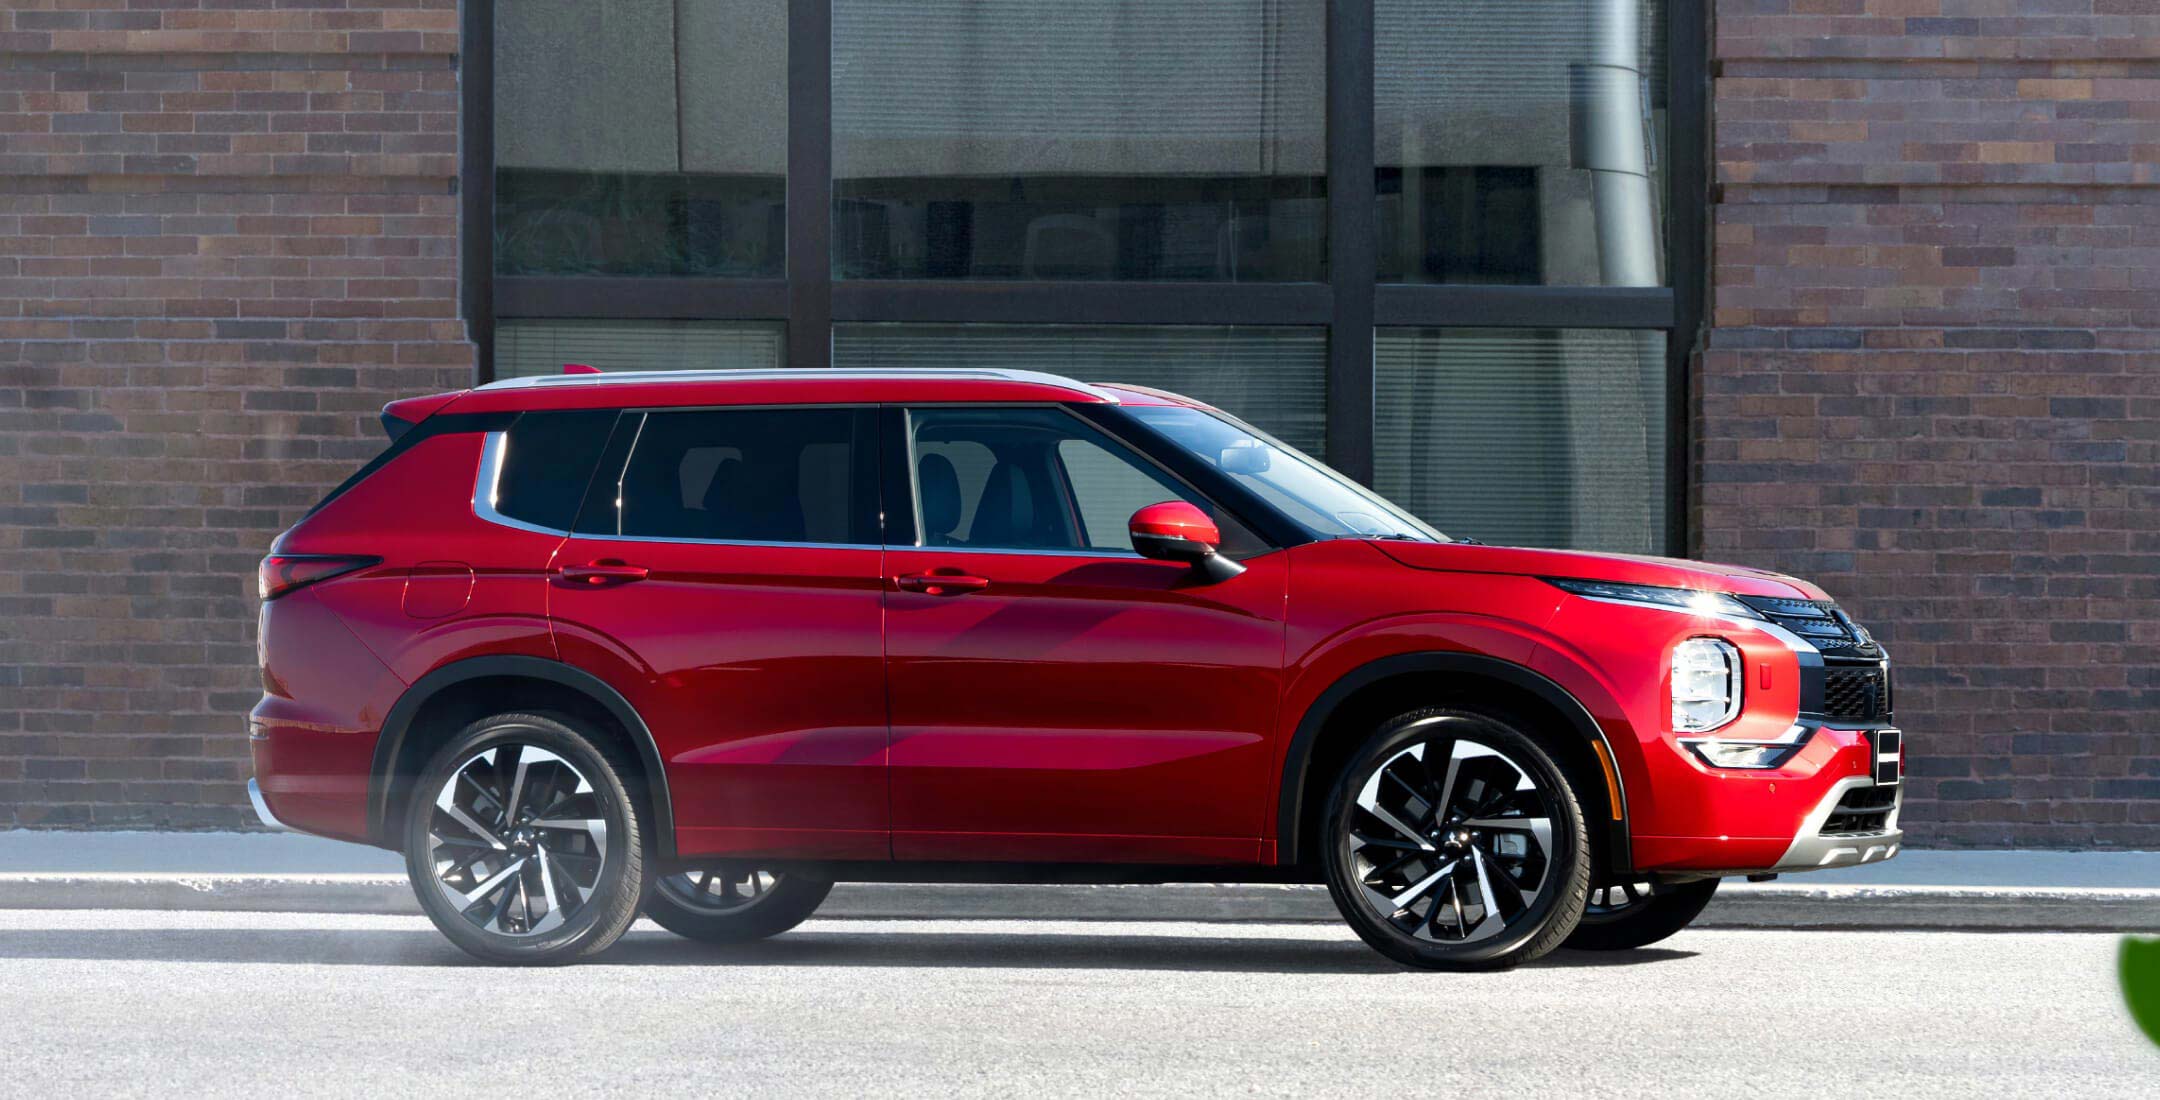 Side profile of a red diamond 2022 Mitsubishi Outlander SUV parked on the road.